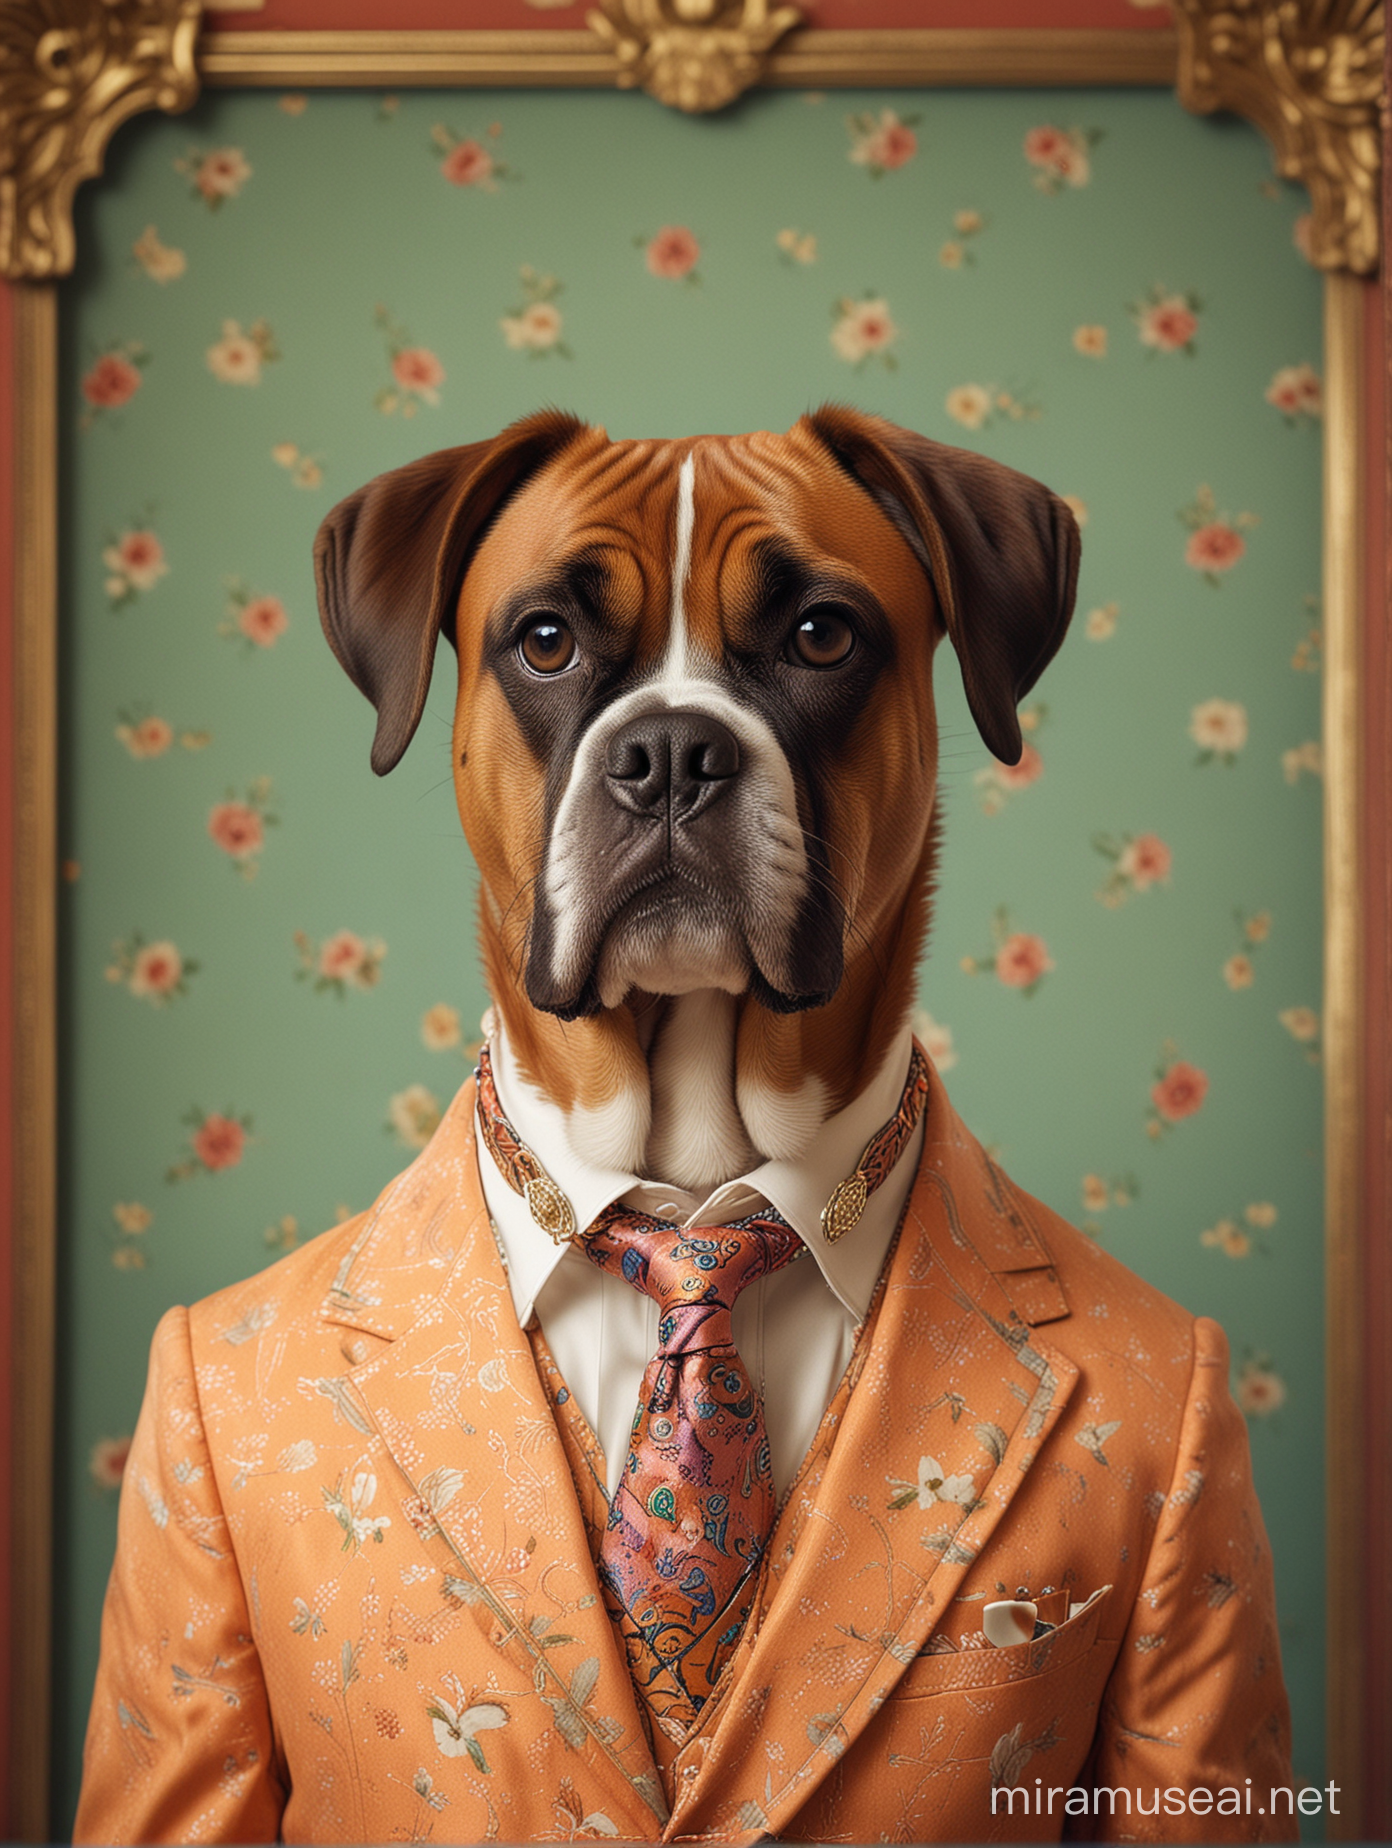 Formally Dressed Boxer Dog in Colorful Wes AndersonInspired Setting